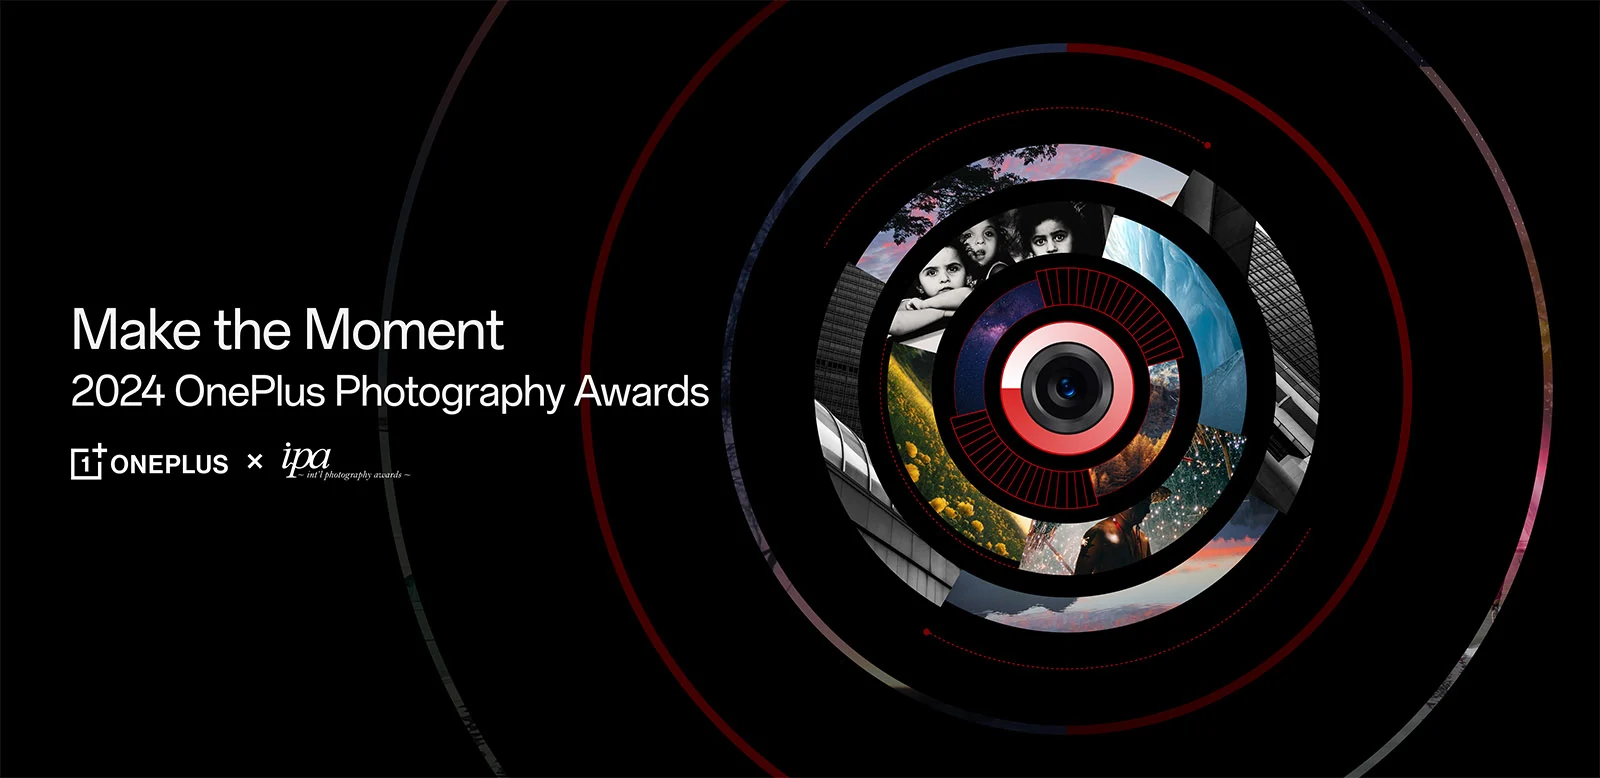 ooneplus photography awards 2024 announcement